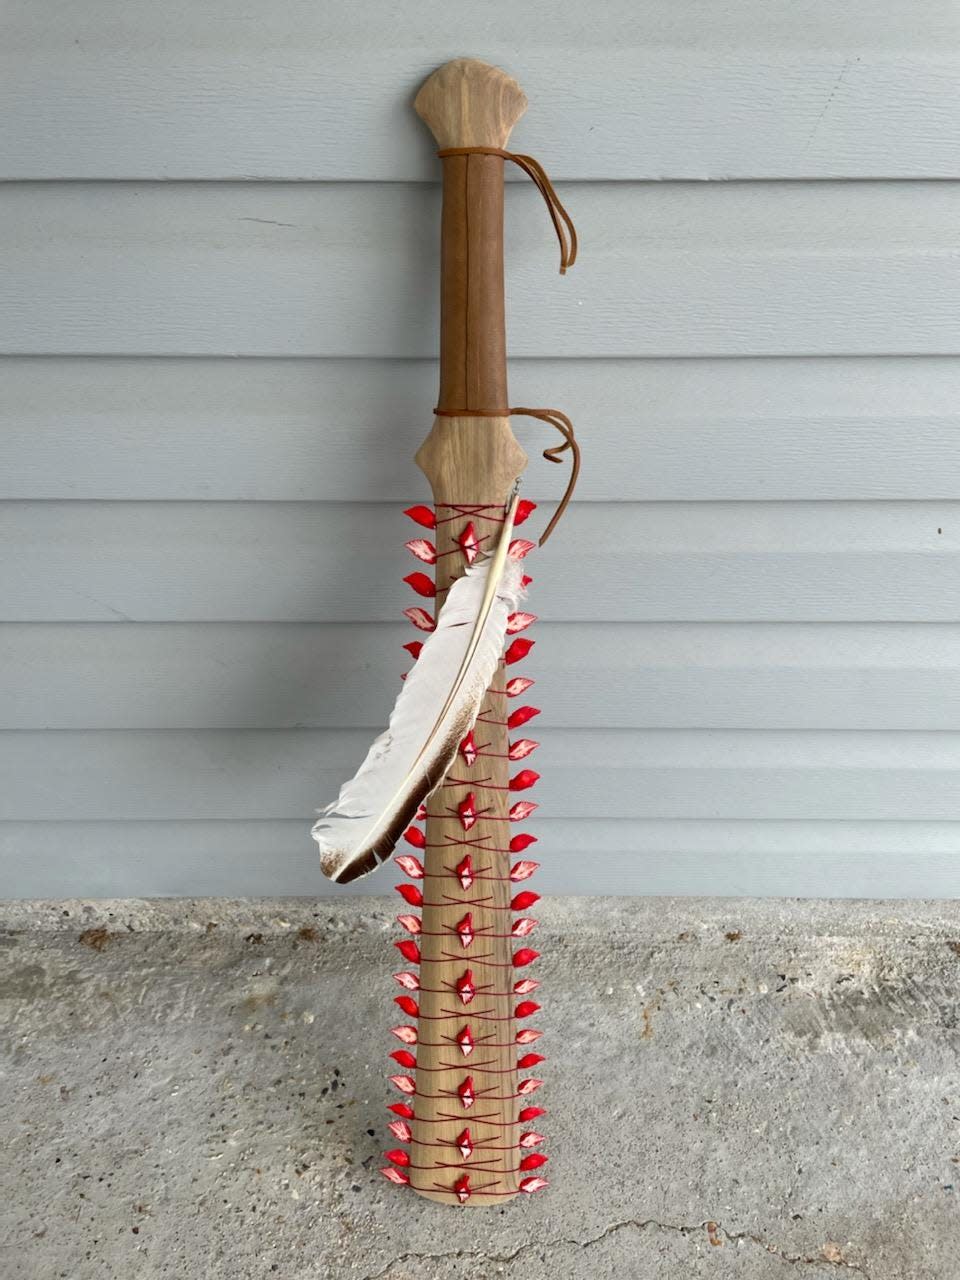 A war club created by Douglas P. Fazzio styled after the Maori clubs of Hawaii. Fazzio used the ganoid scales of the alligator garfish in the design.